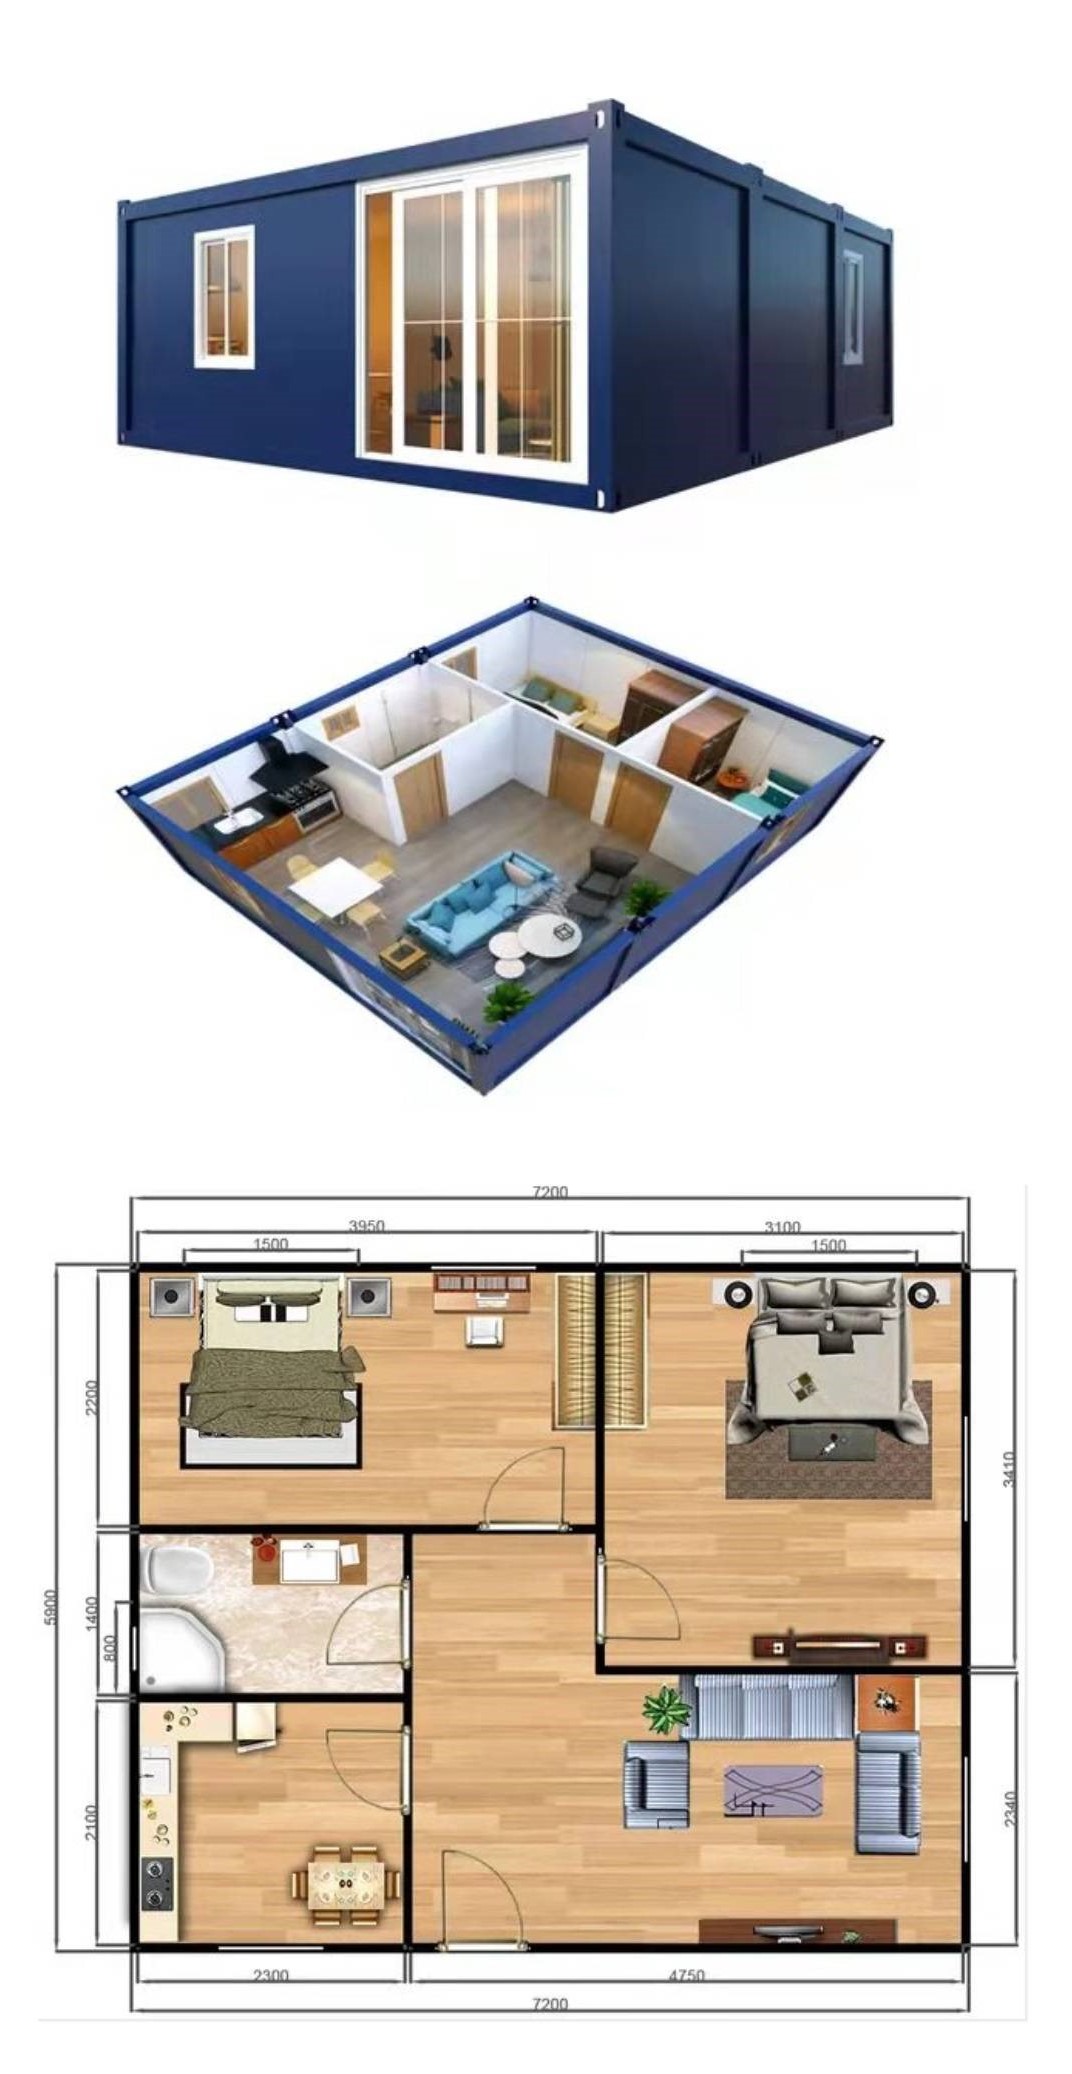 Layout of a modern container house